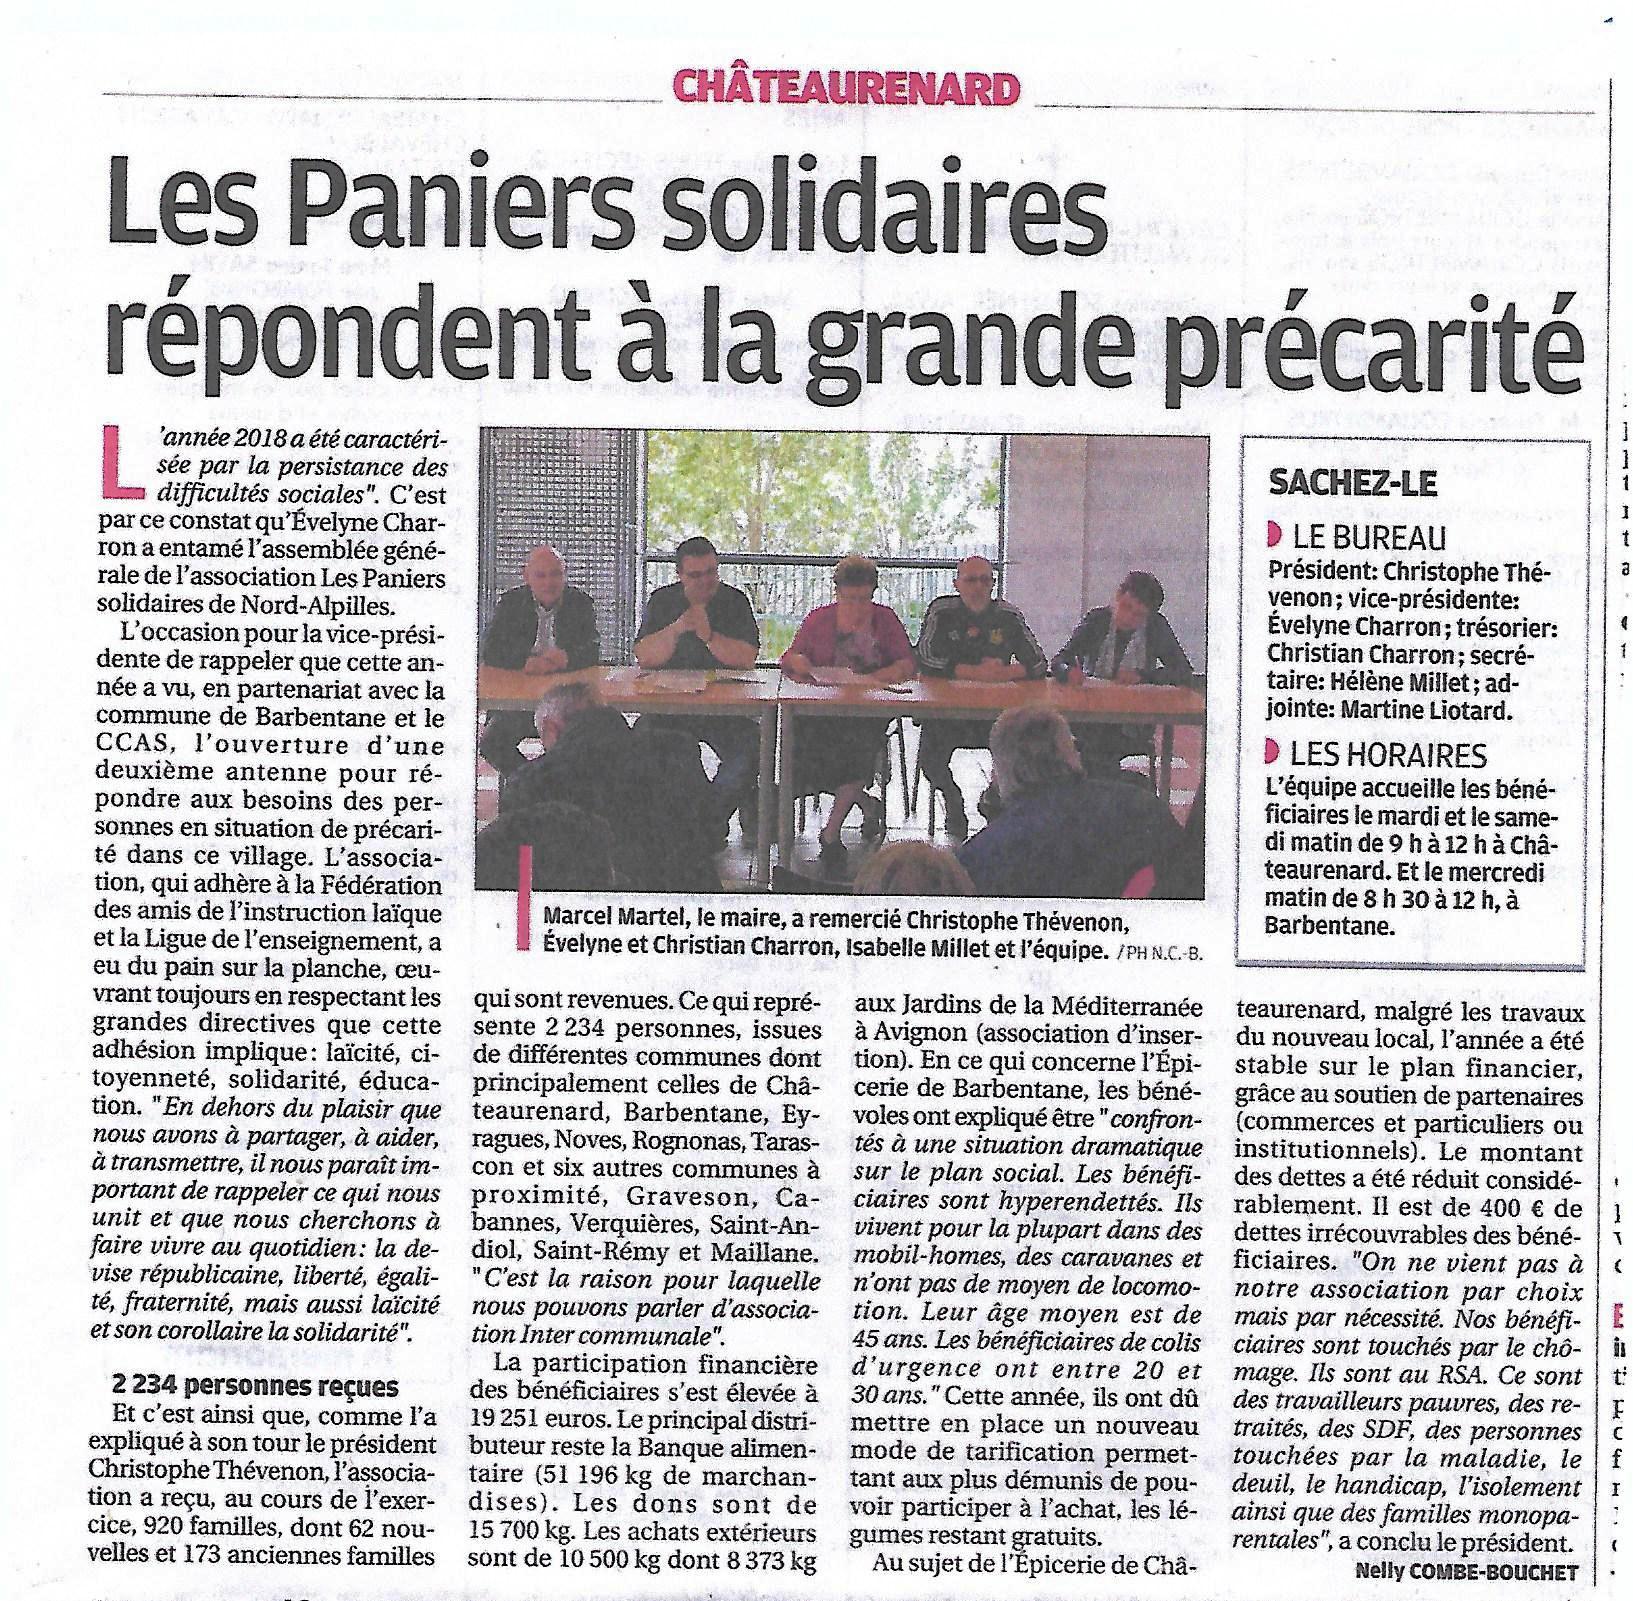 Château Paniers solidaires